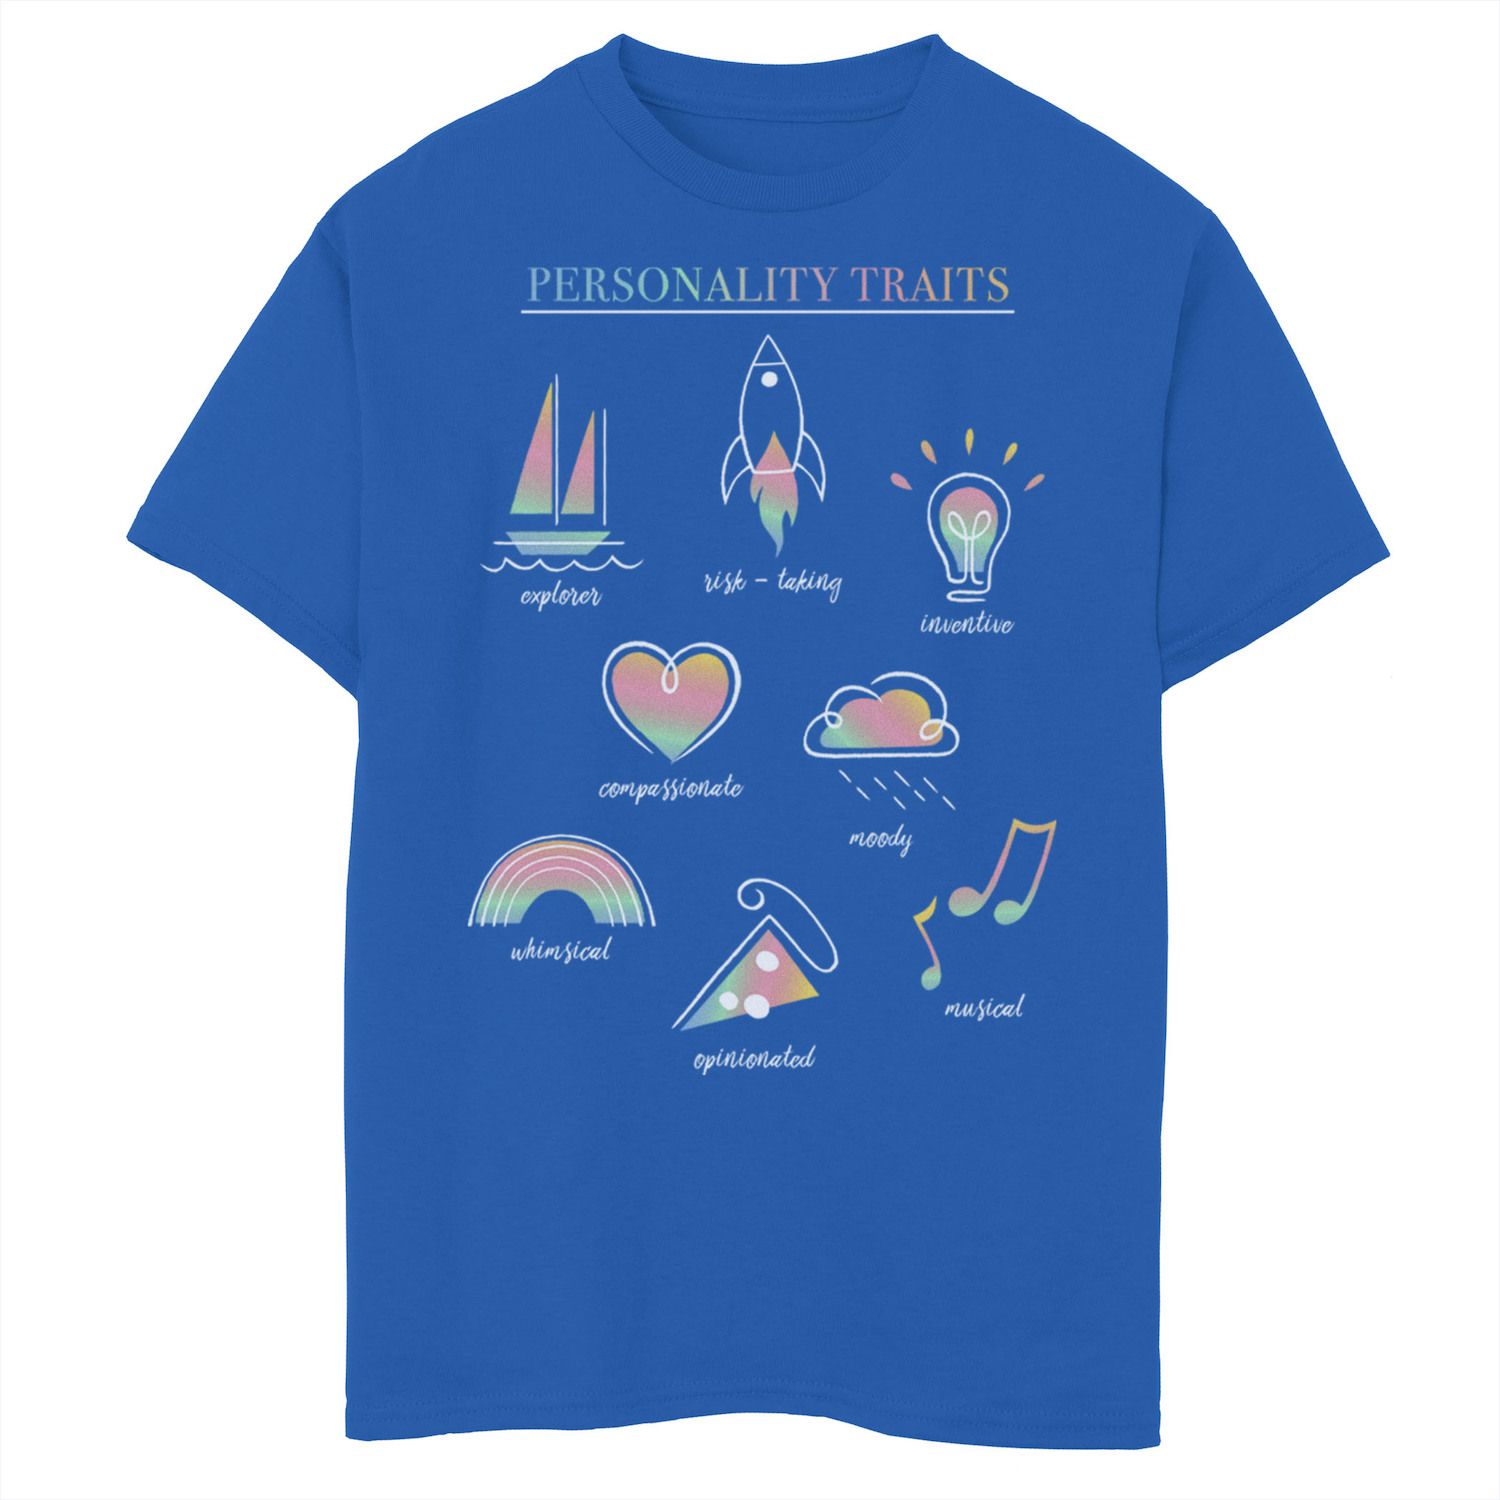 Image for Disney / Pixar 's Soul Boys 8-20 Personality Traits Graphic Tee at Kohl's.